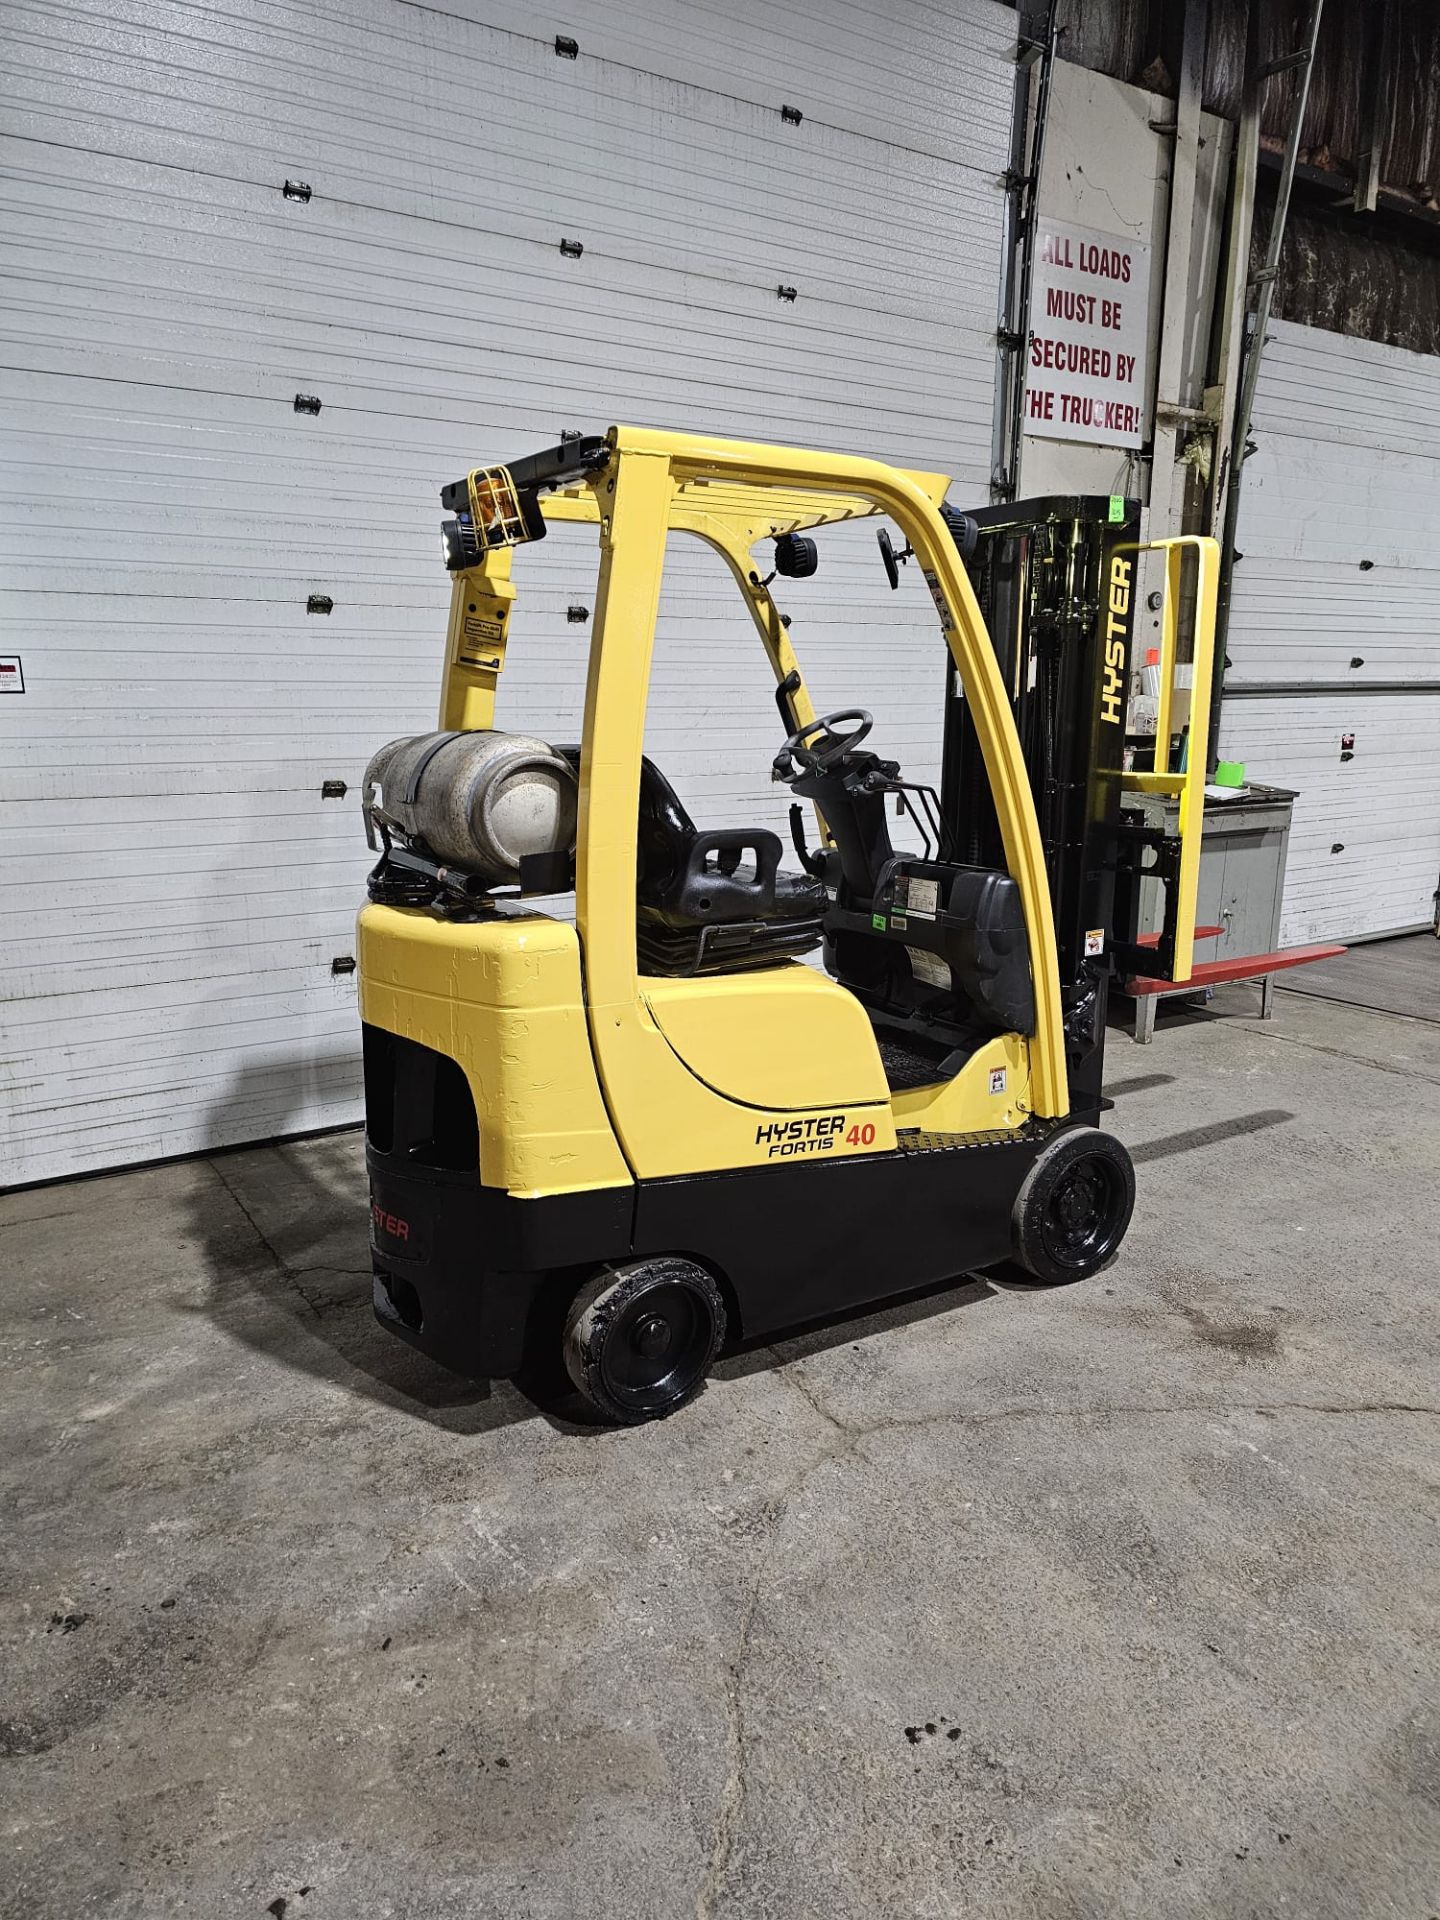 2015 Hyster 4,000lbs Capacity LPG (Propane) Forklift with sideshift and 3-STAGE MAST (no propane - Image 2 of 5